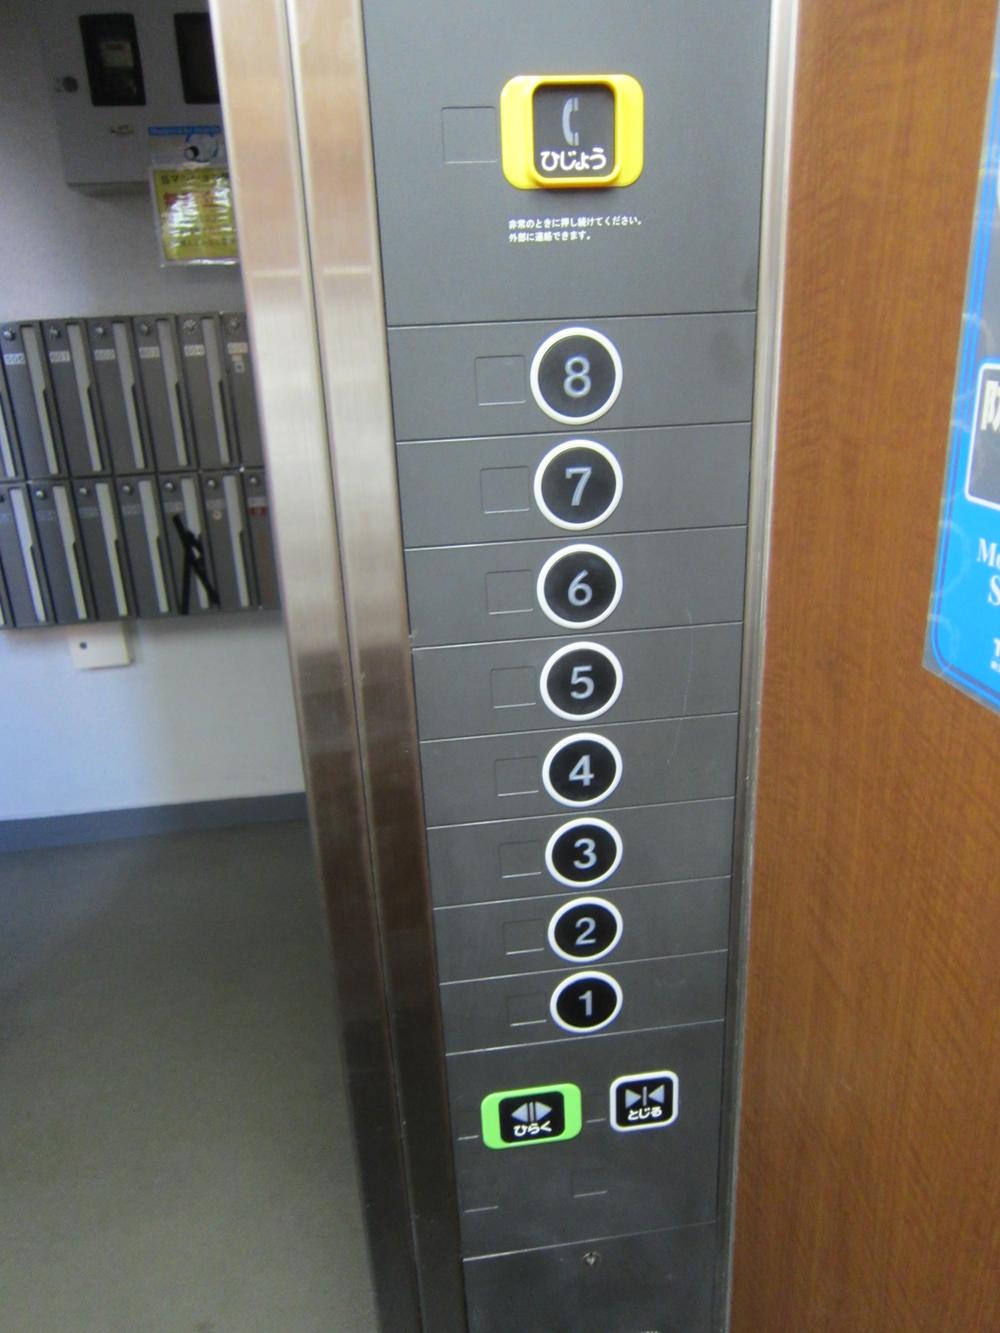 Other common areas. Apartment shared Elevator